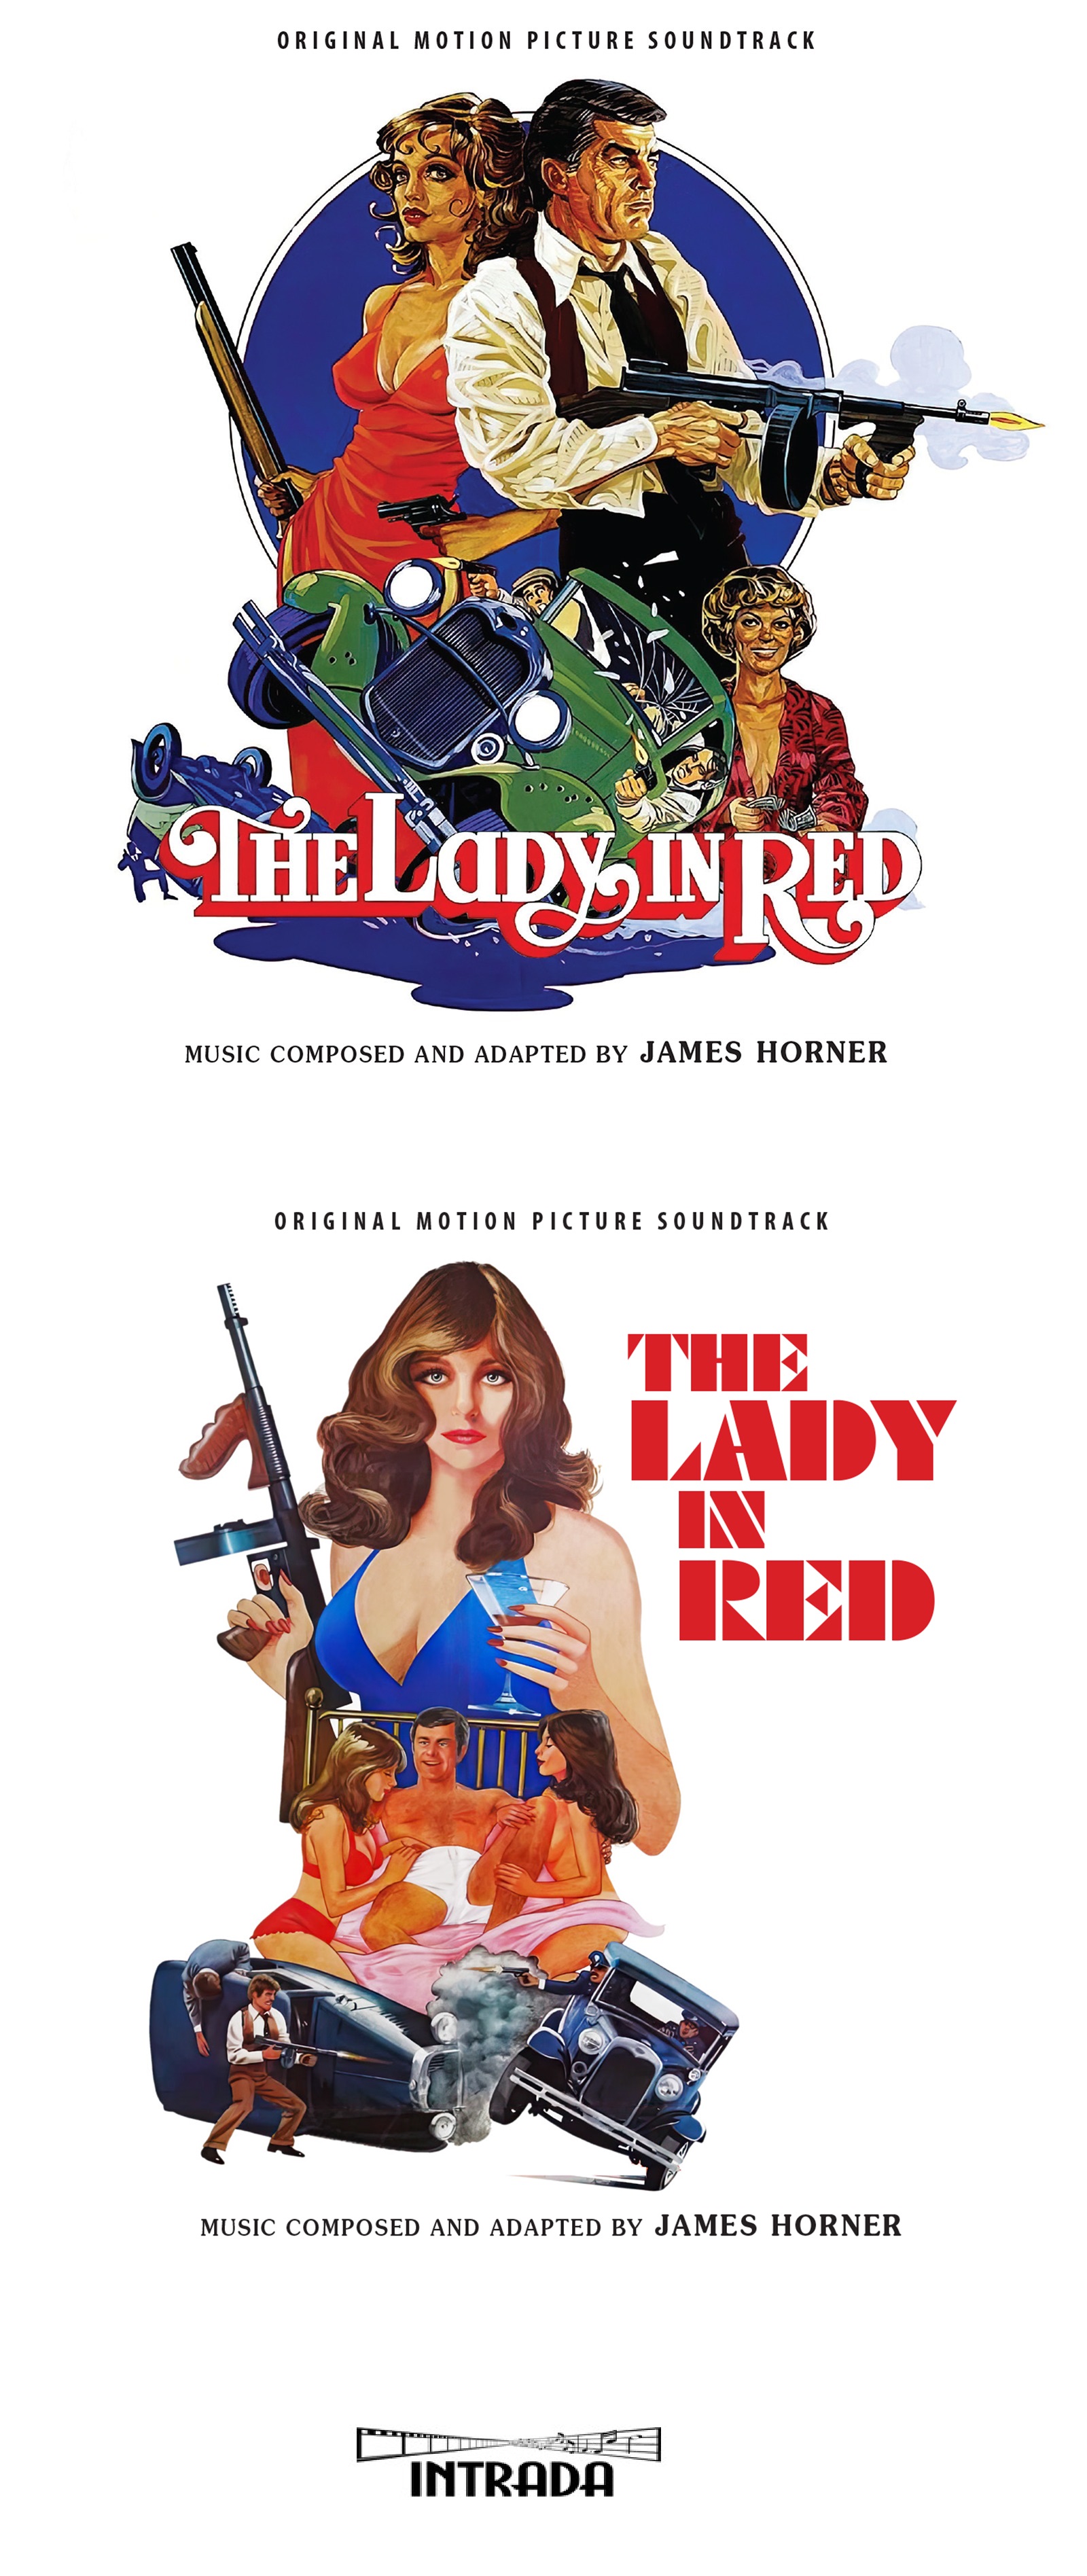 Du rouge pour un truand (The Lady in Red) 1979 